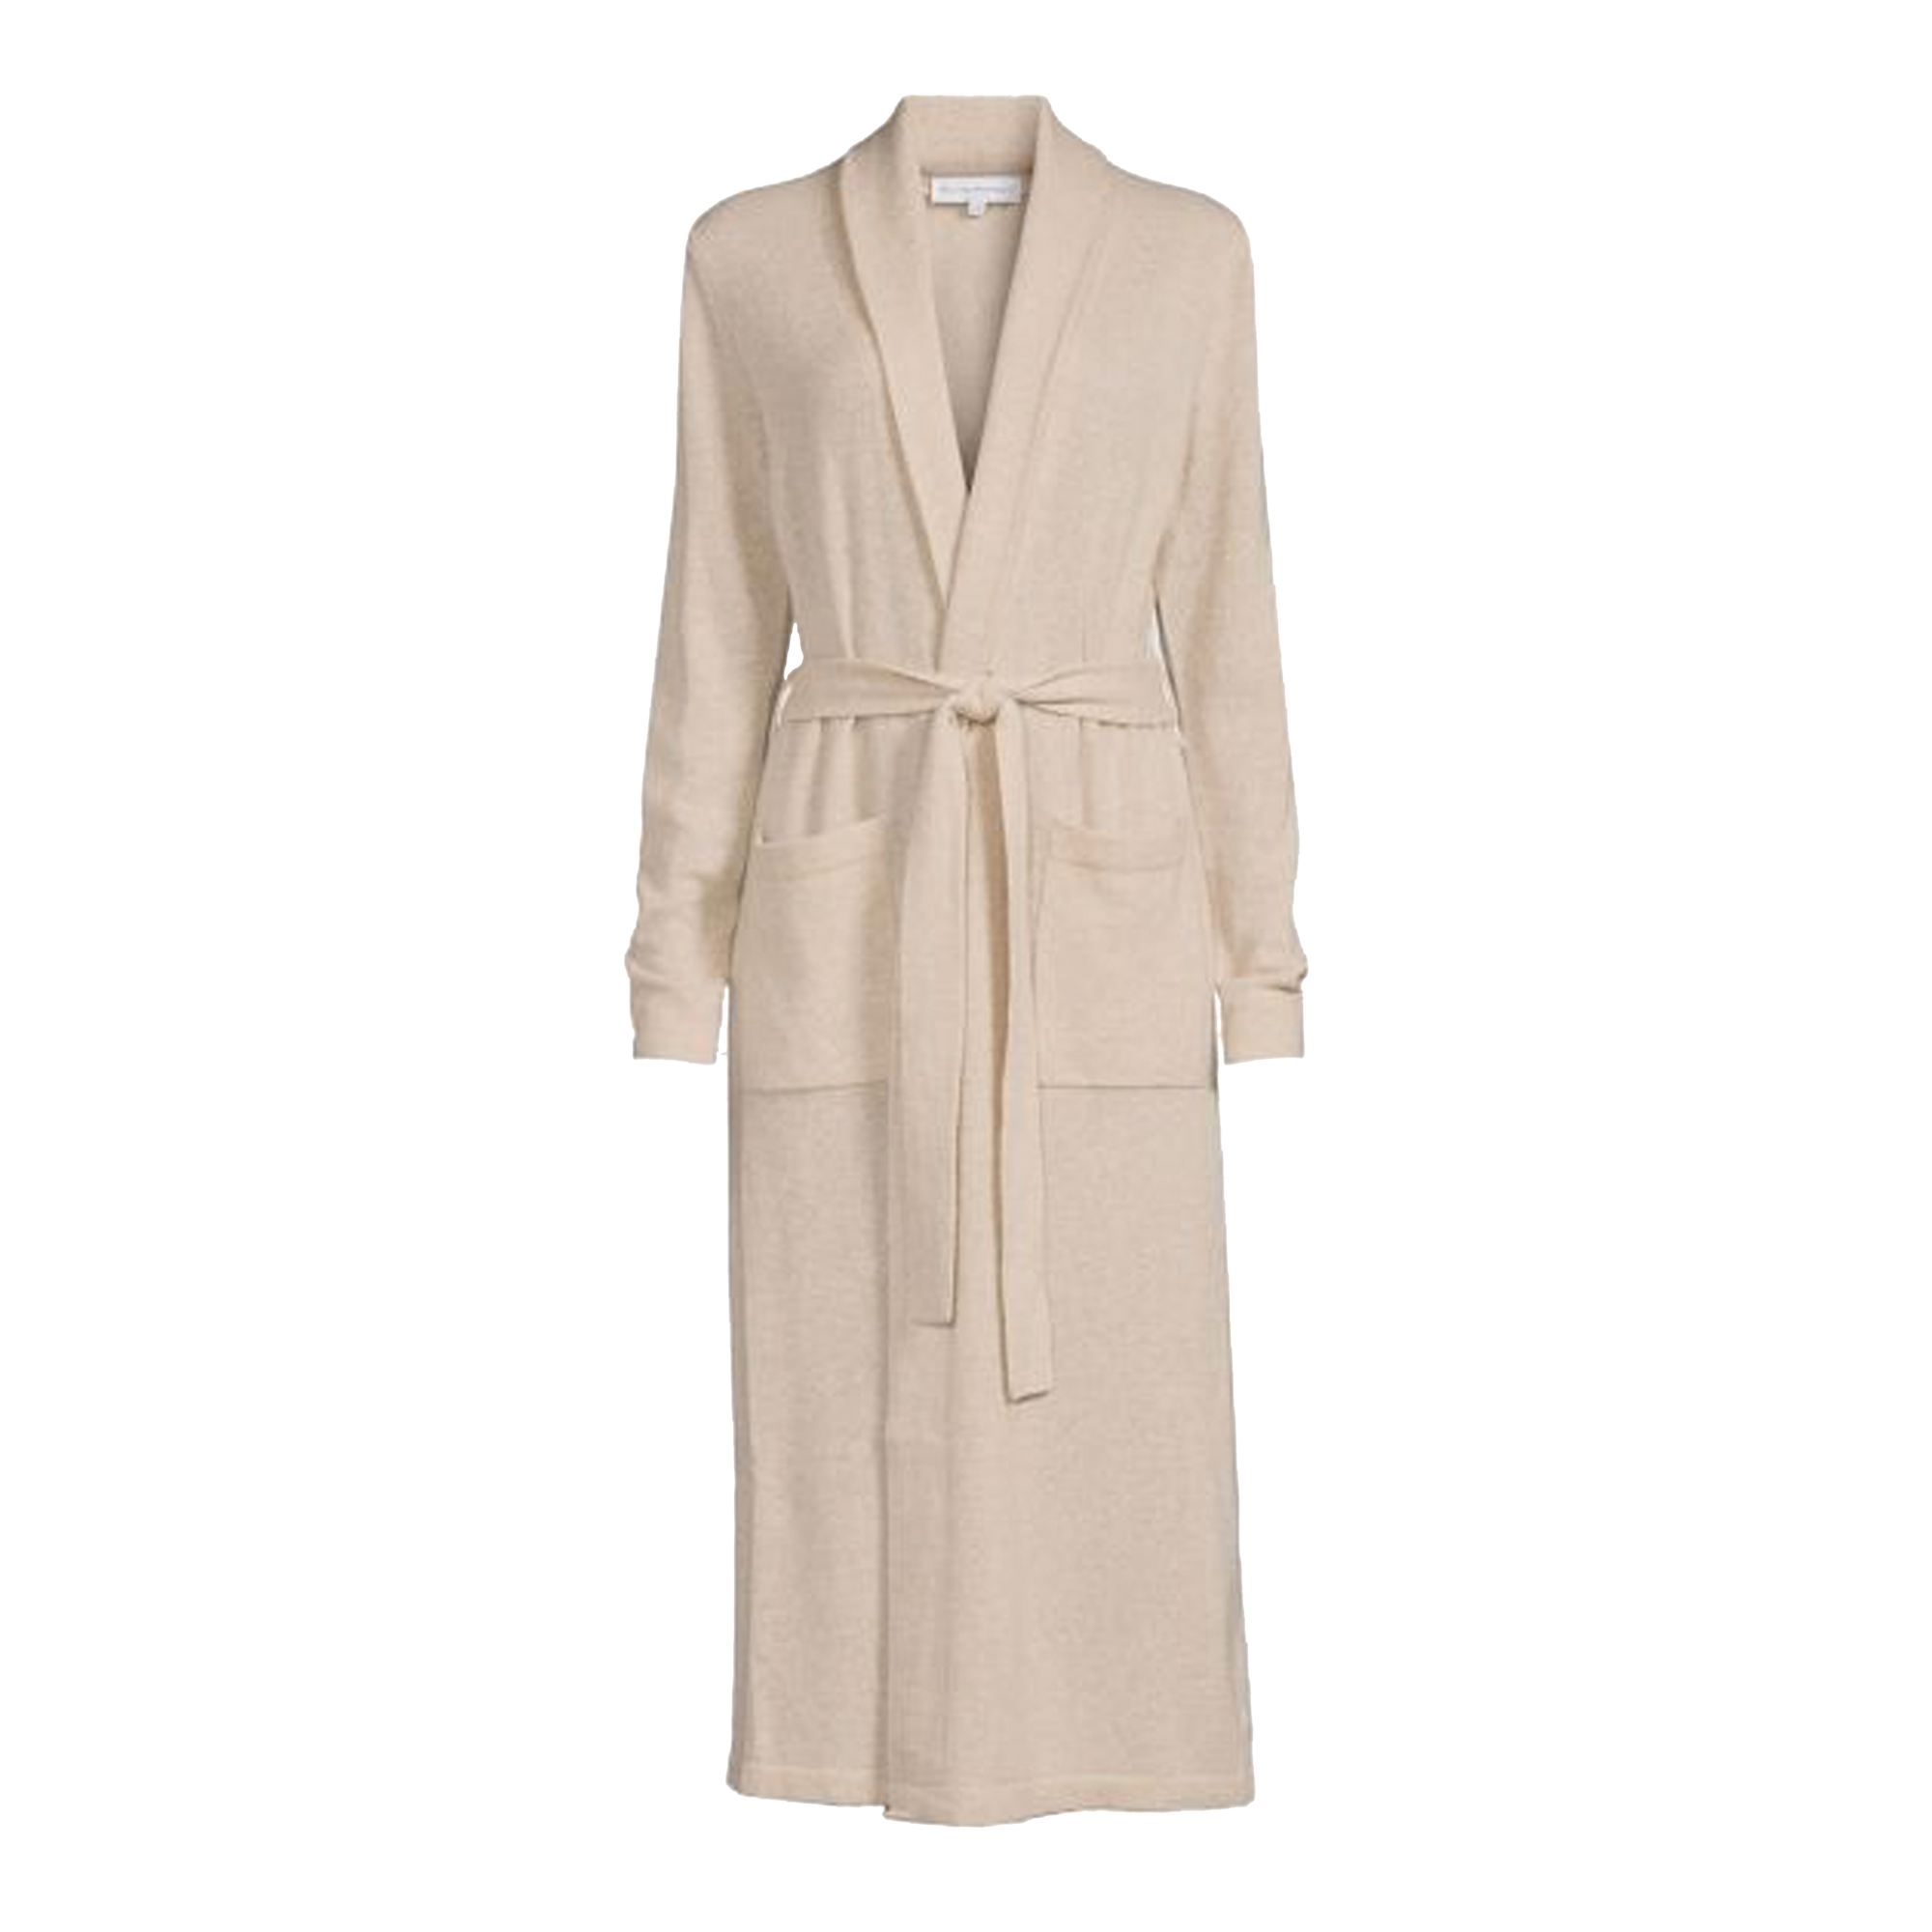 Spun from the finest cashmere yarn, the Cashmere Long Robe features a sleek shawl collar, roomy patch pockets, and an easy fit that's designed to effortlessly skim your shape.